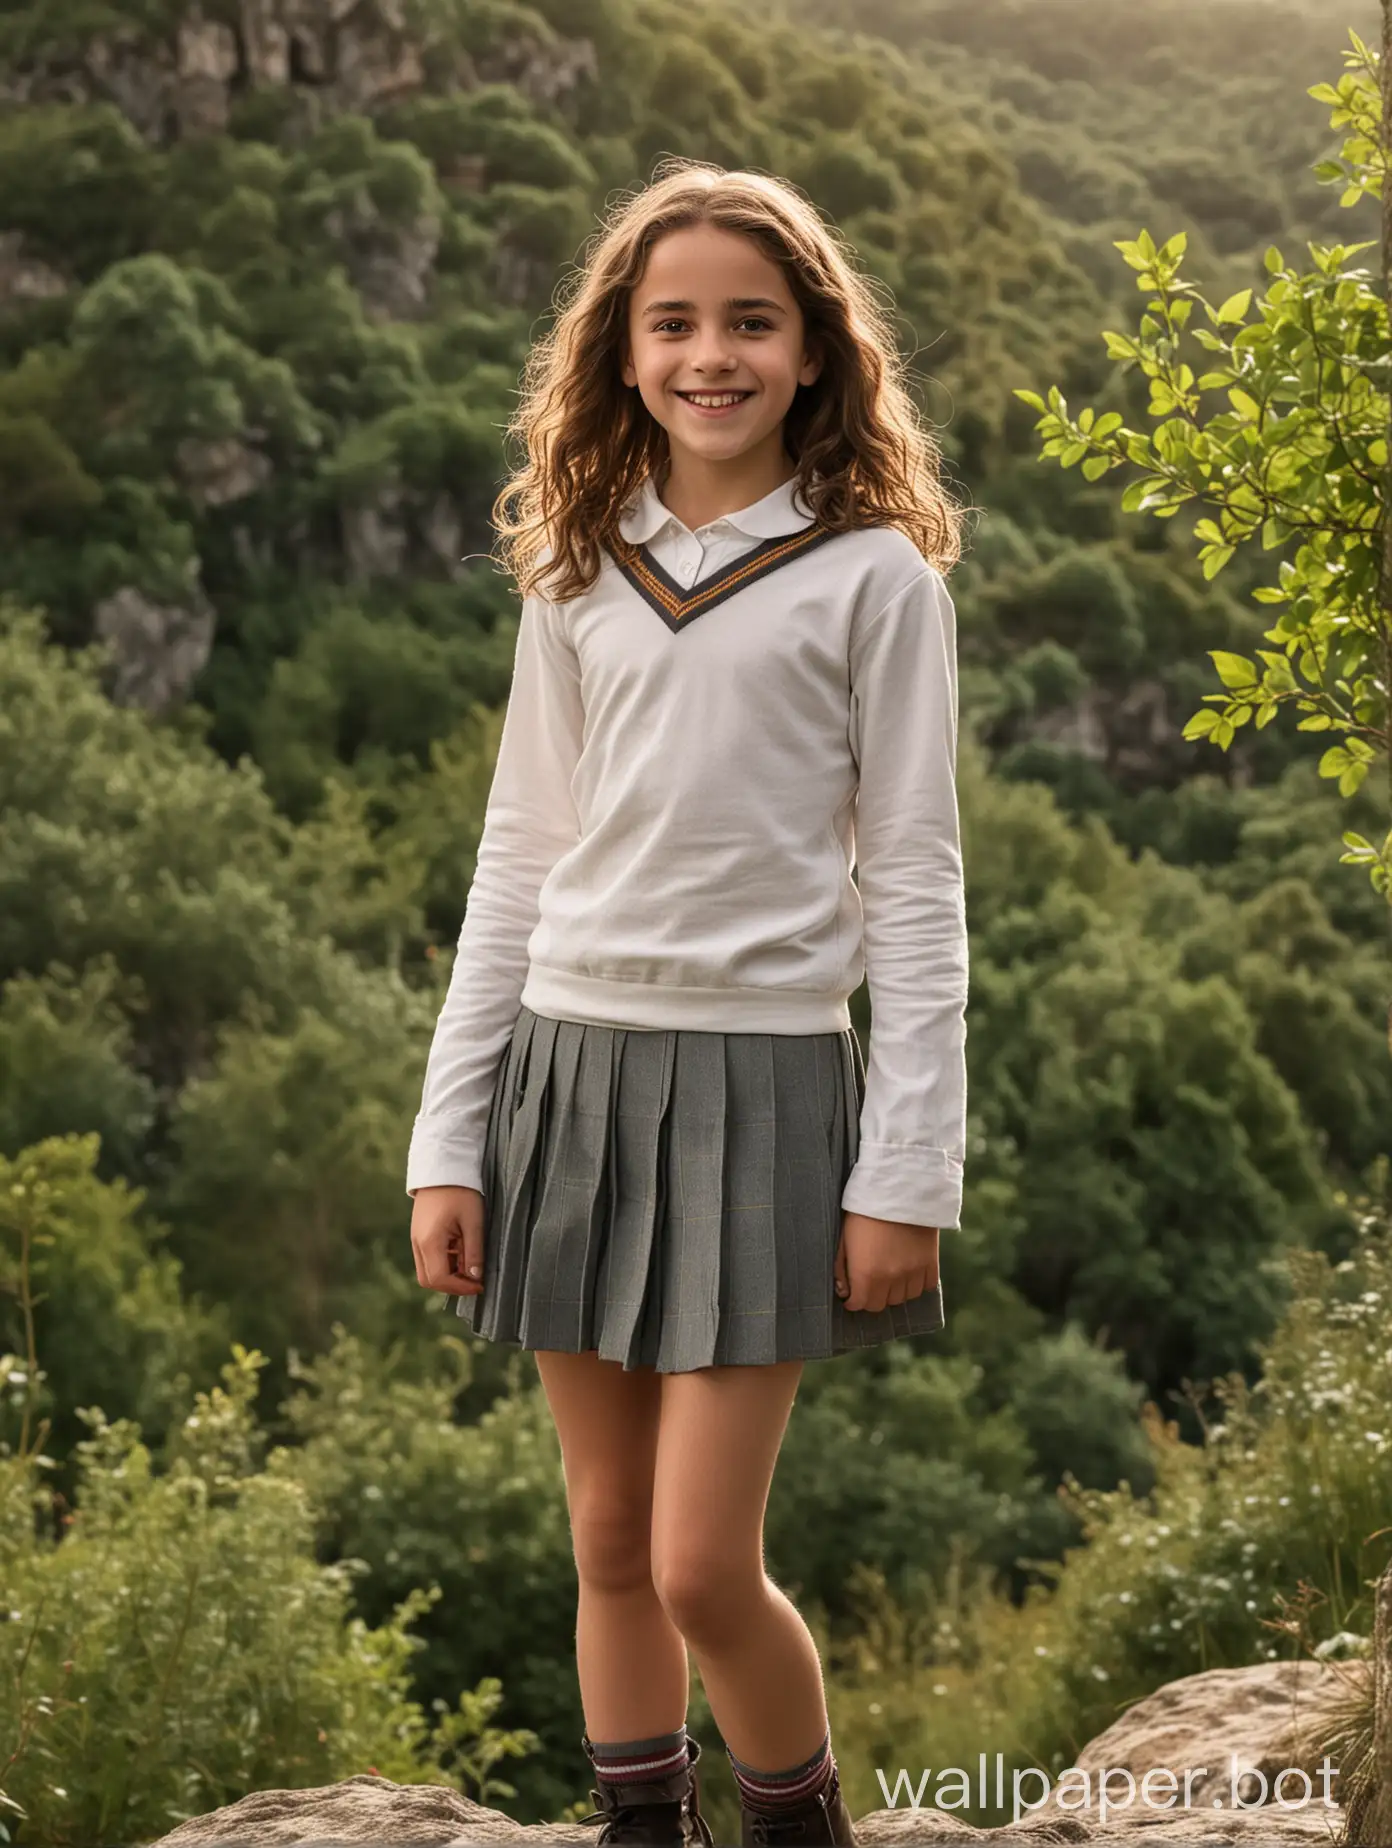 Smiling-Hermione-Granger-Girl-in-Nature-Setting